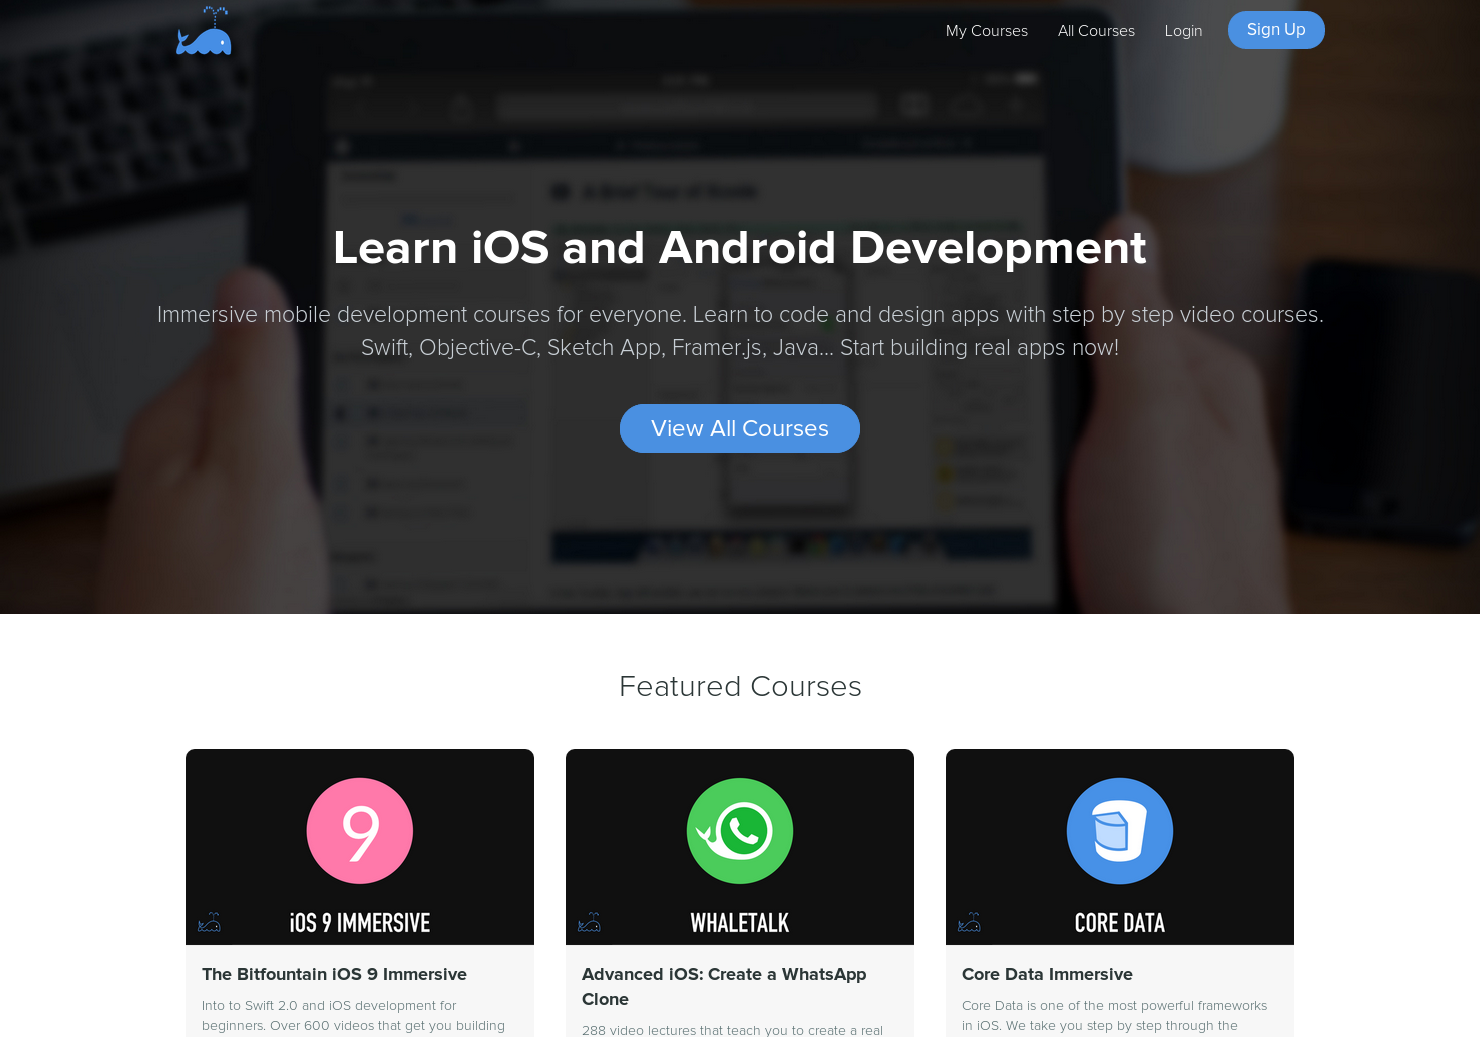 The Complete iOS 8 Course